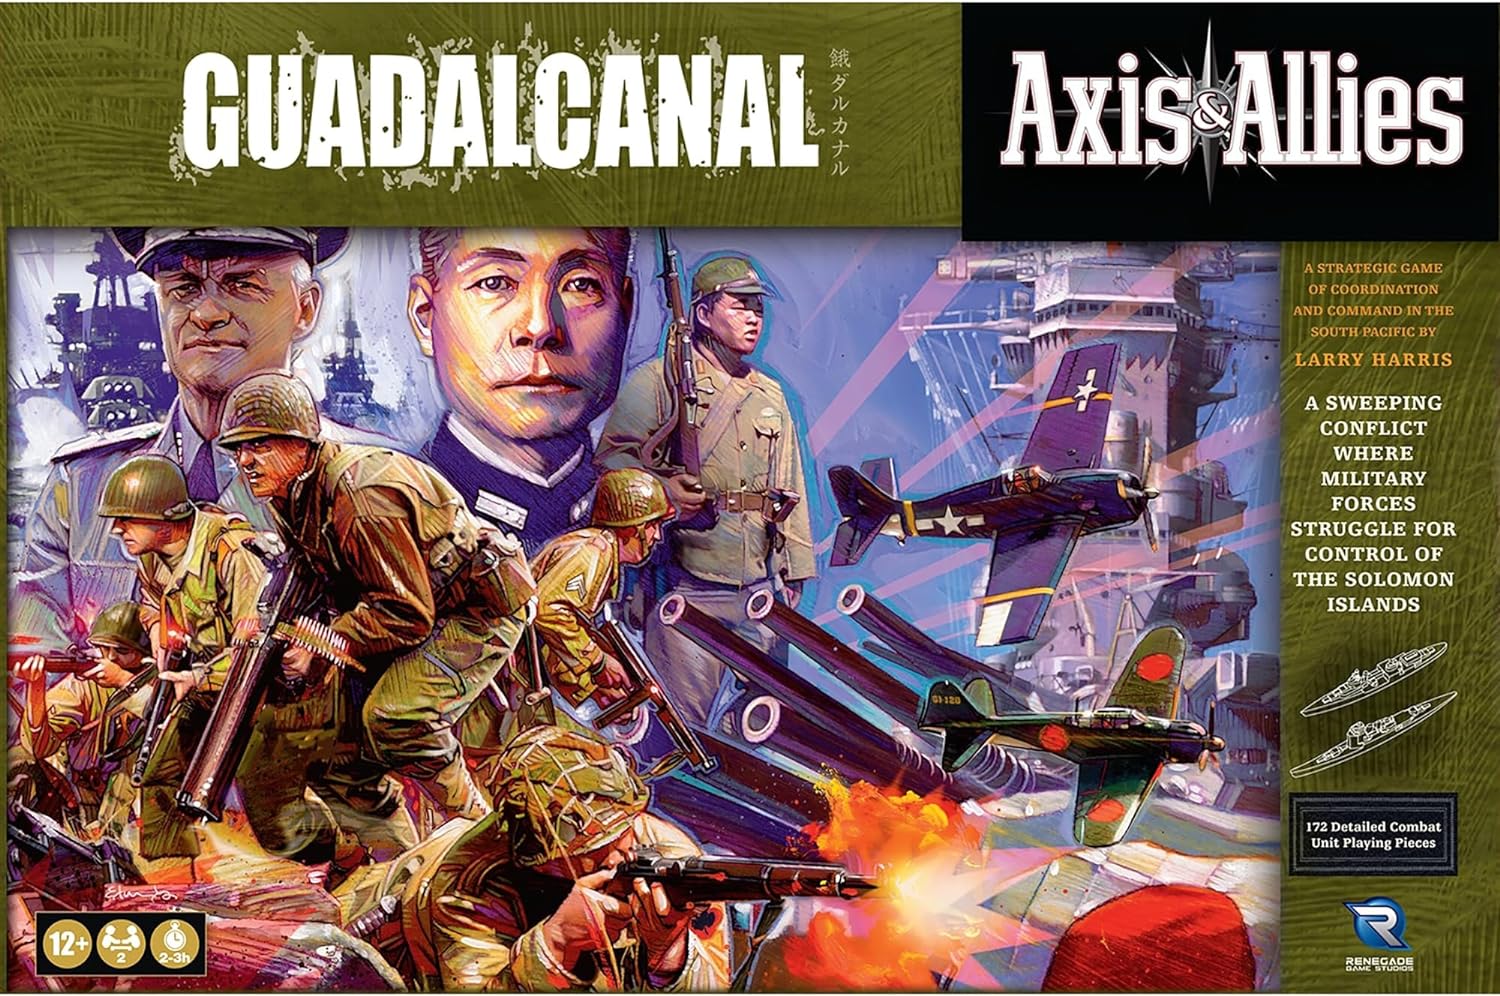 Axis And Allies: Guadalcanal